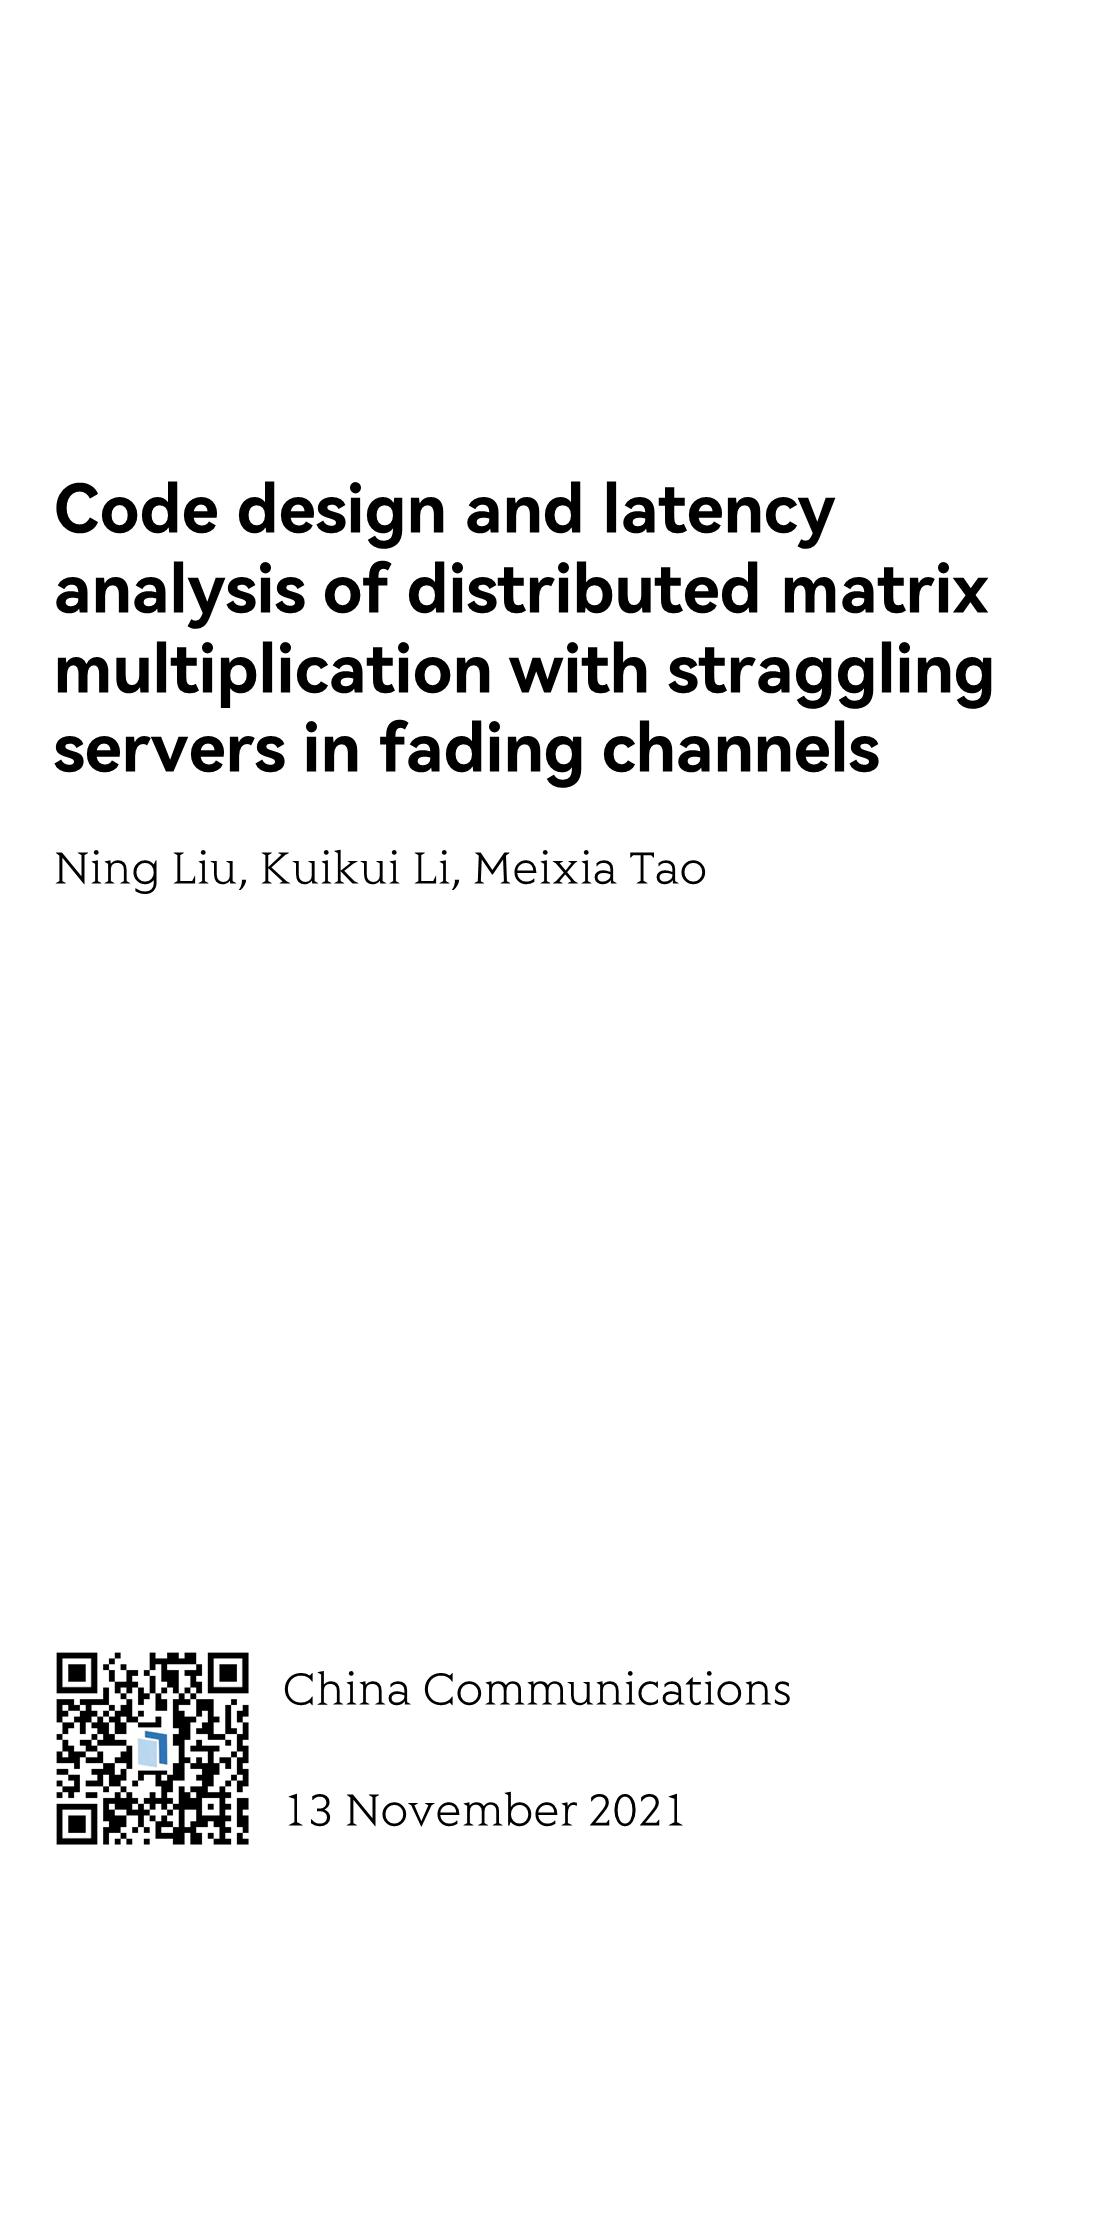 Code design and latency analysis of distributed matrix multiplication with straggling servers in fading channels_1